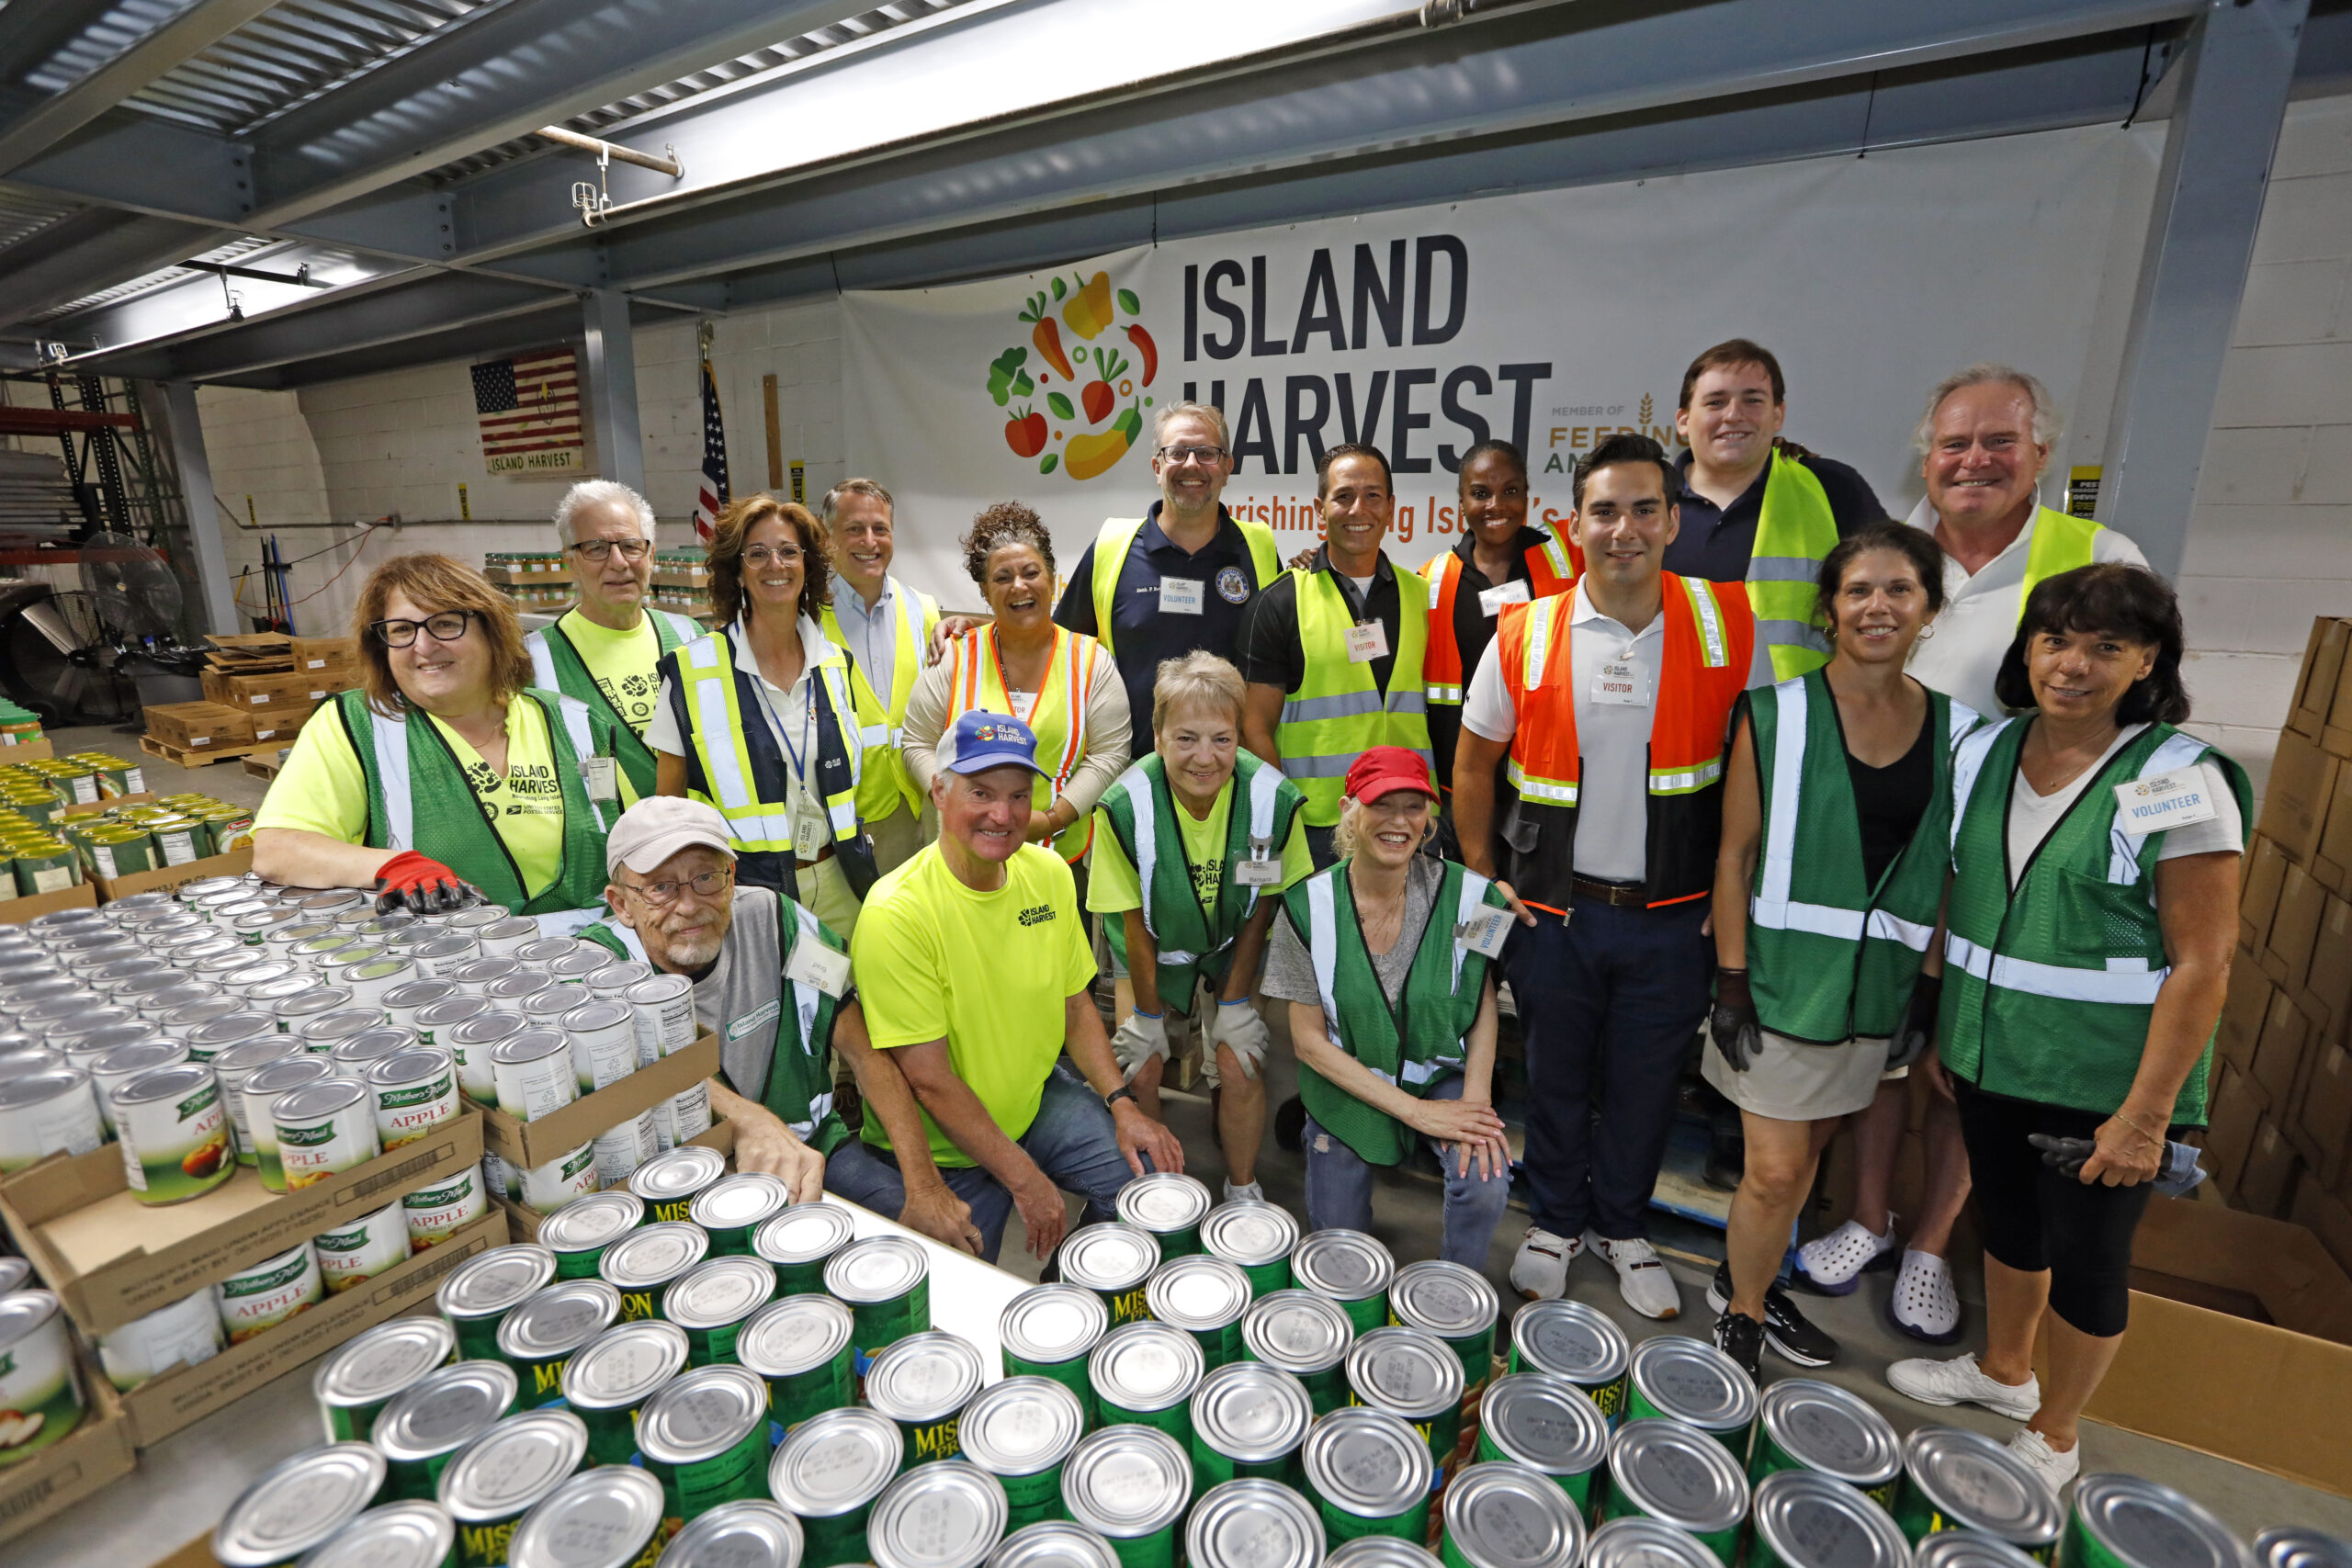 Assemblyman Durso Hosts 2nd Annual “assembly Assemble Day” At Island